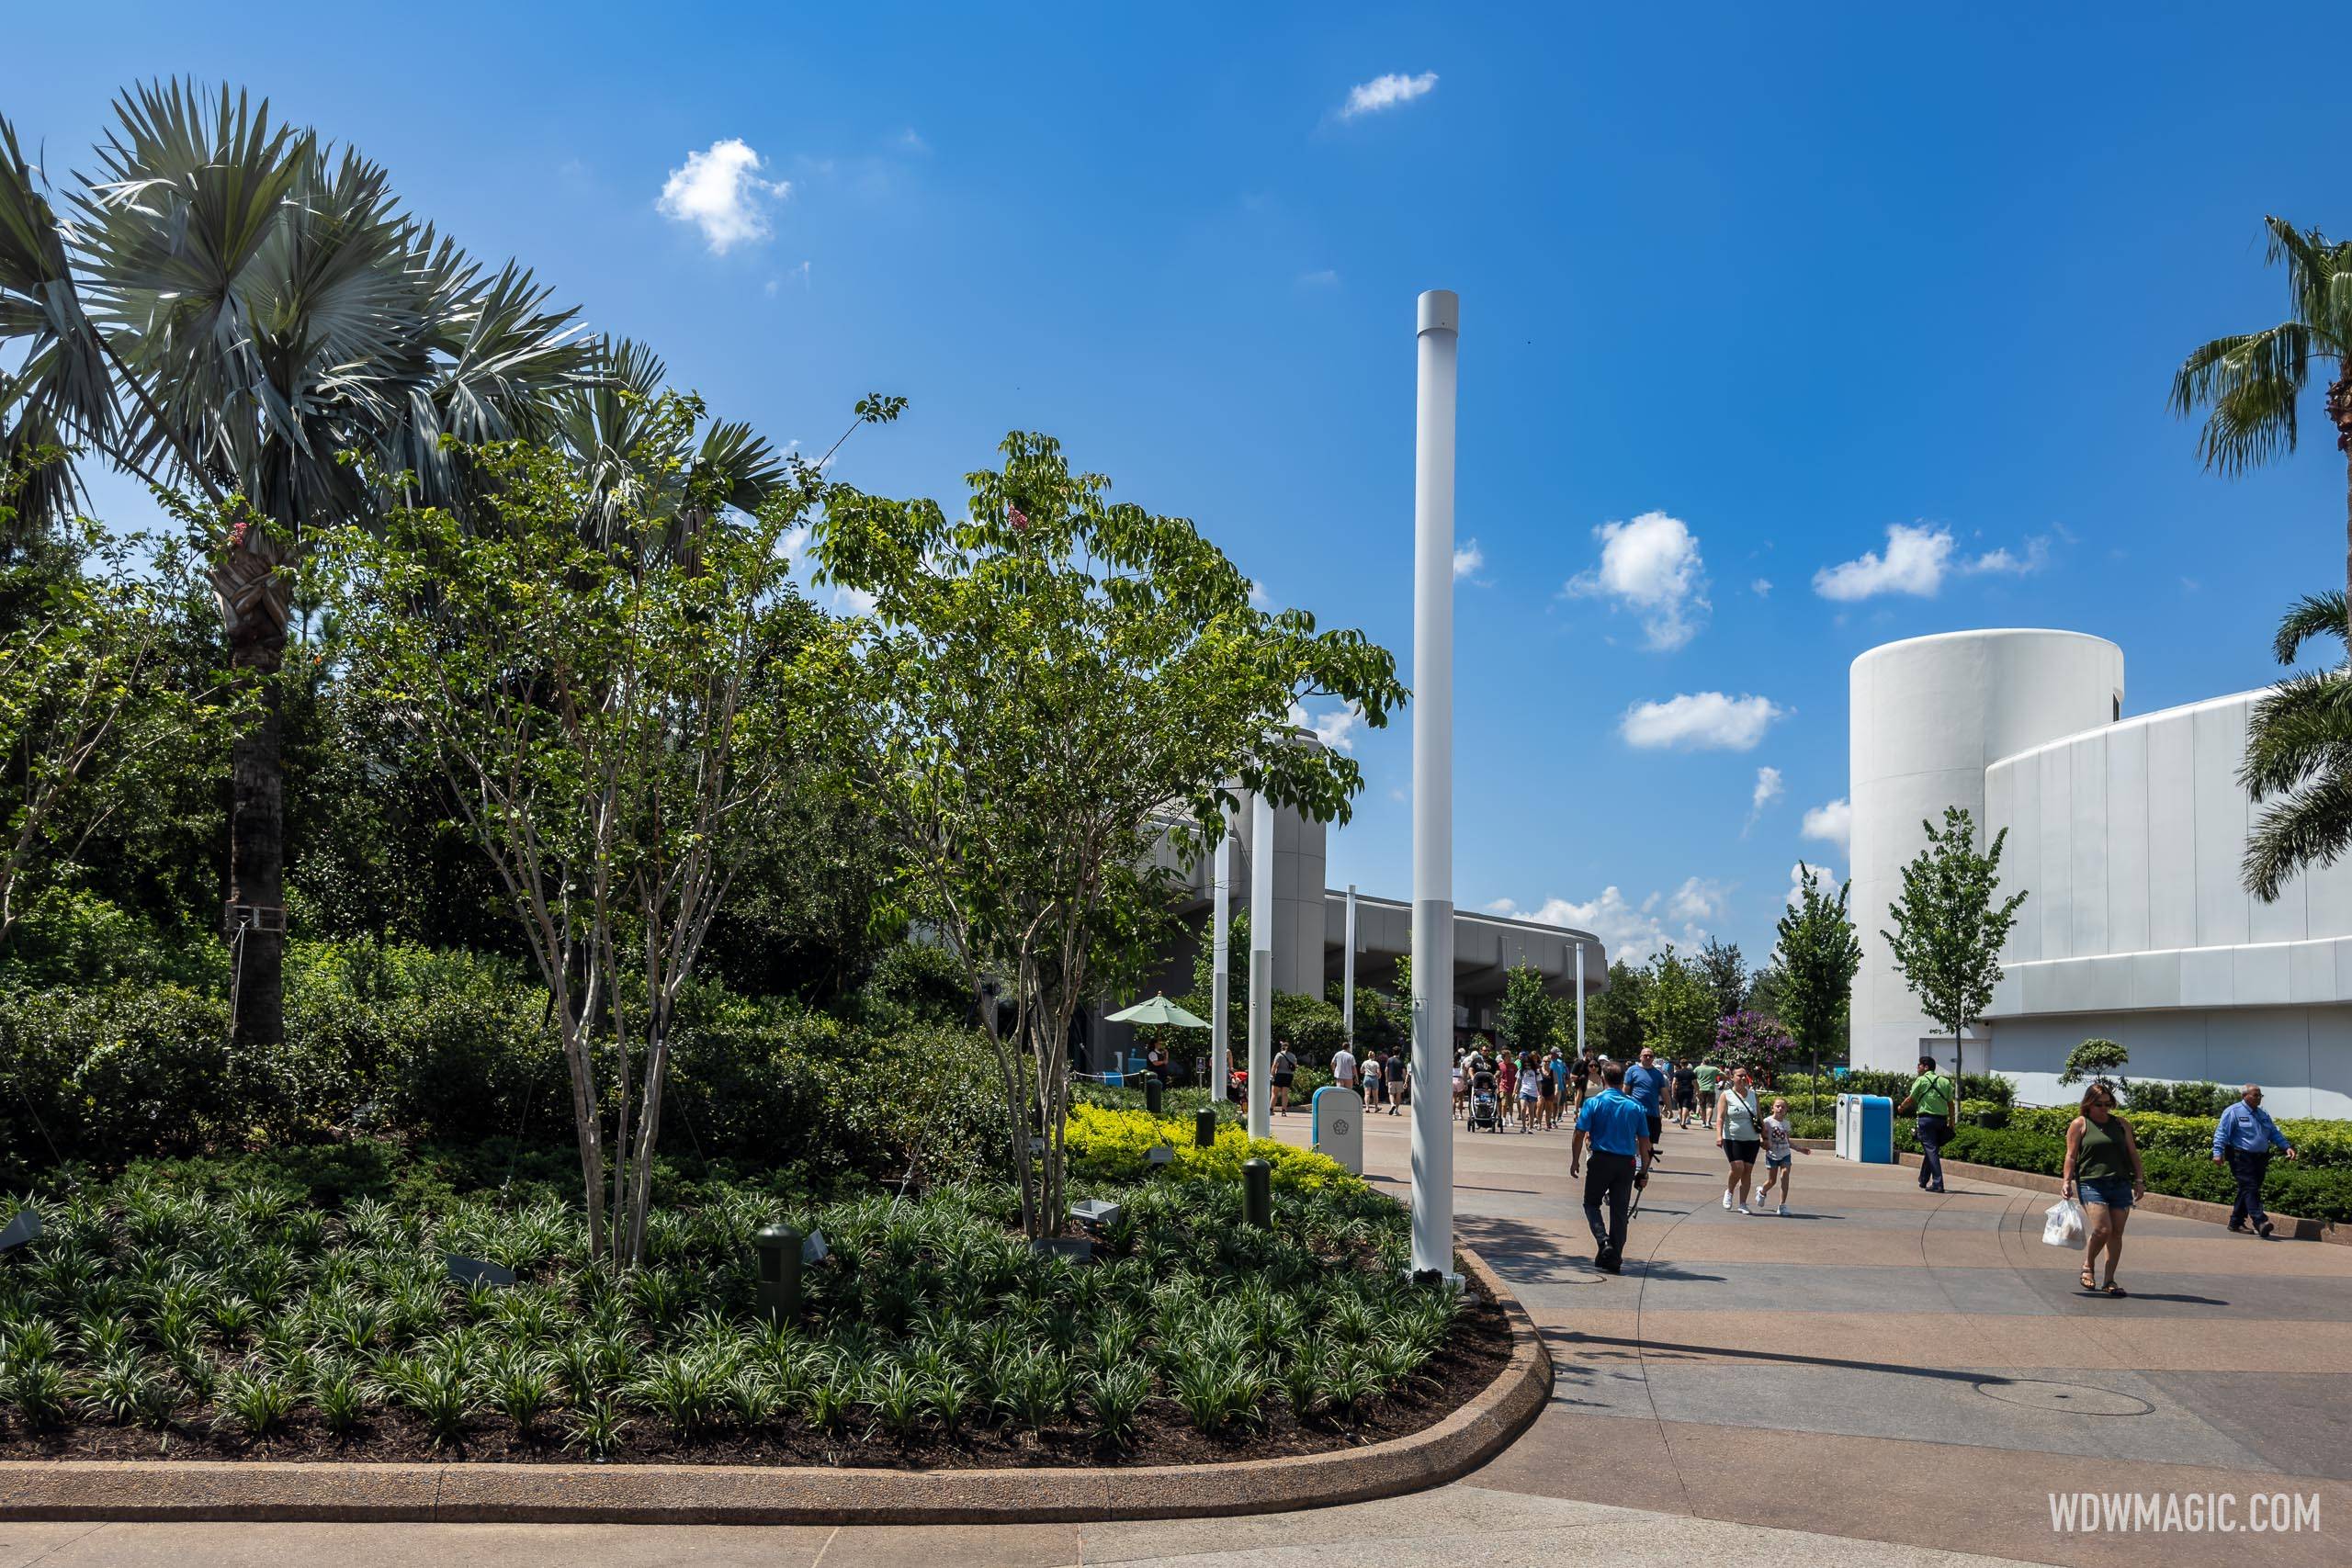 Construction walls removed around Guest Relations area and Spaceship Earth at EPCOT